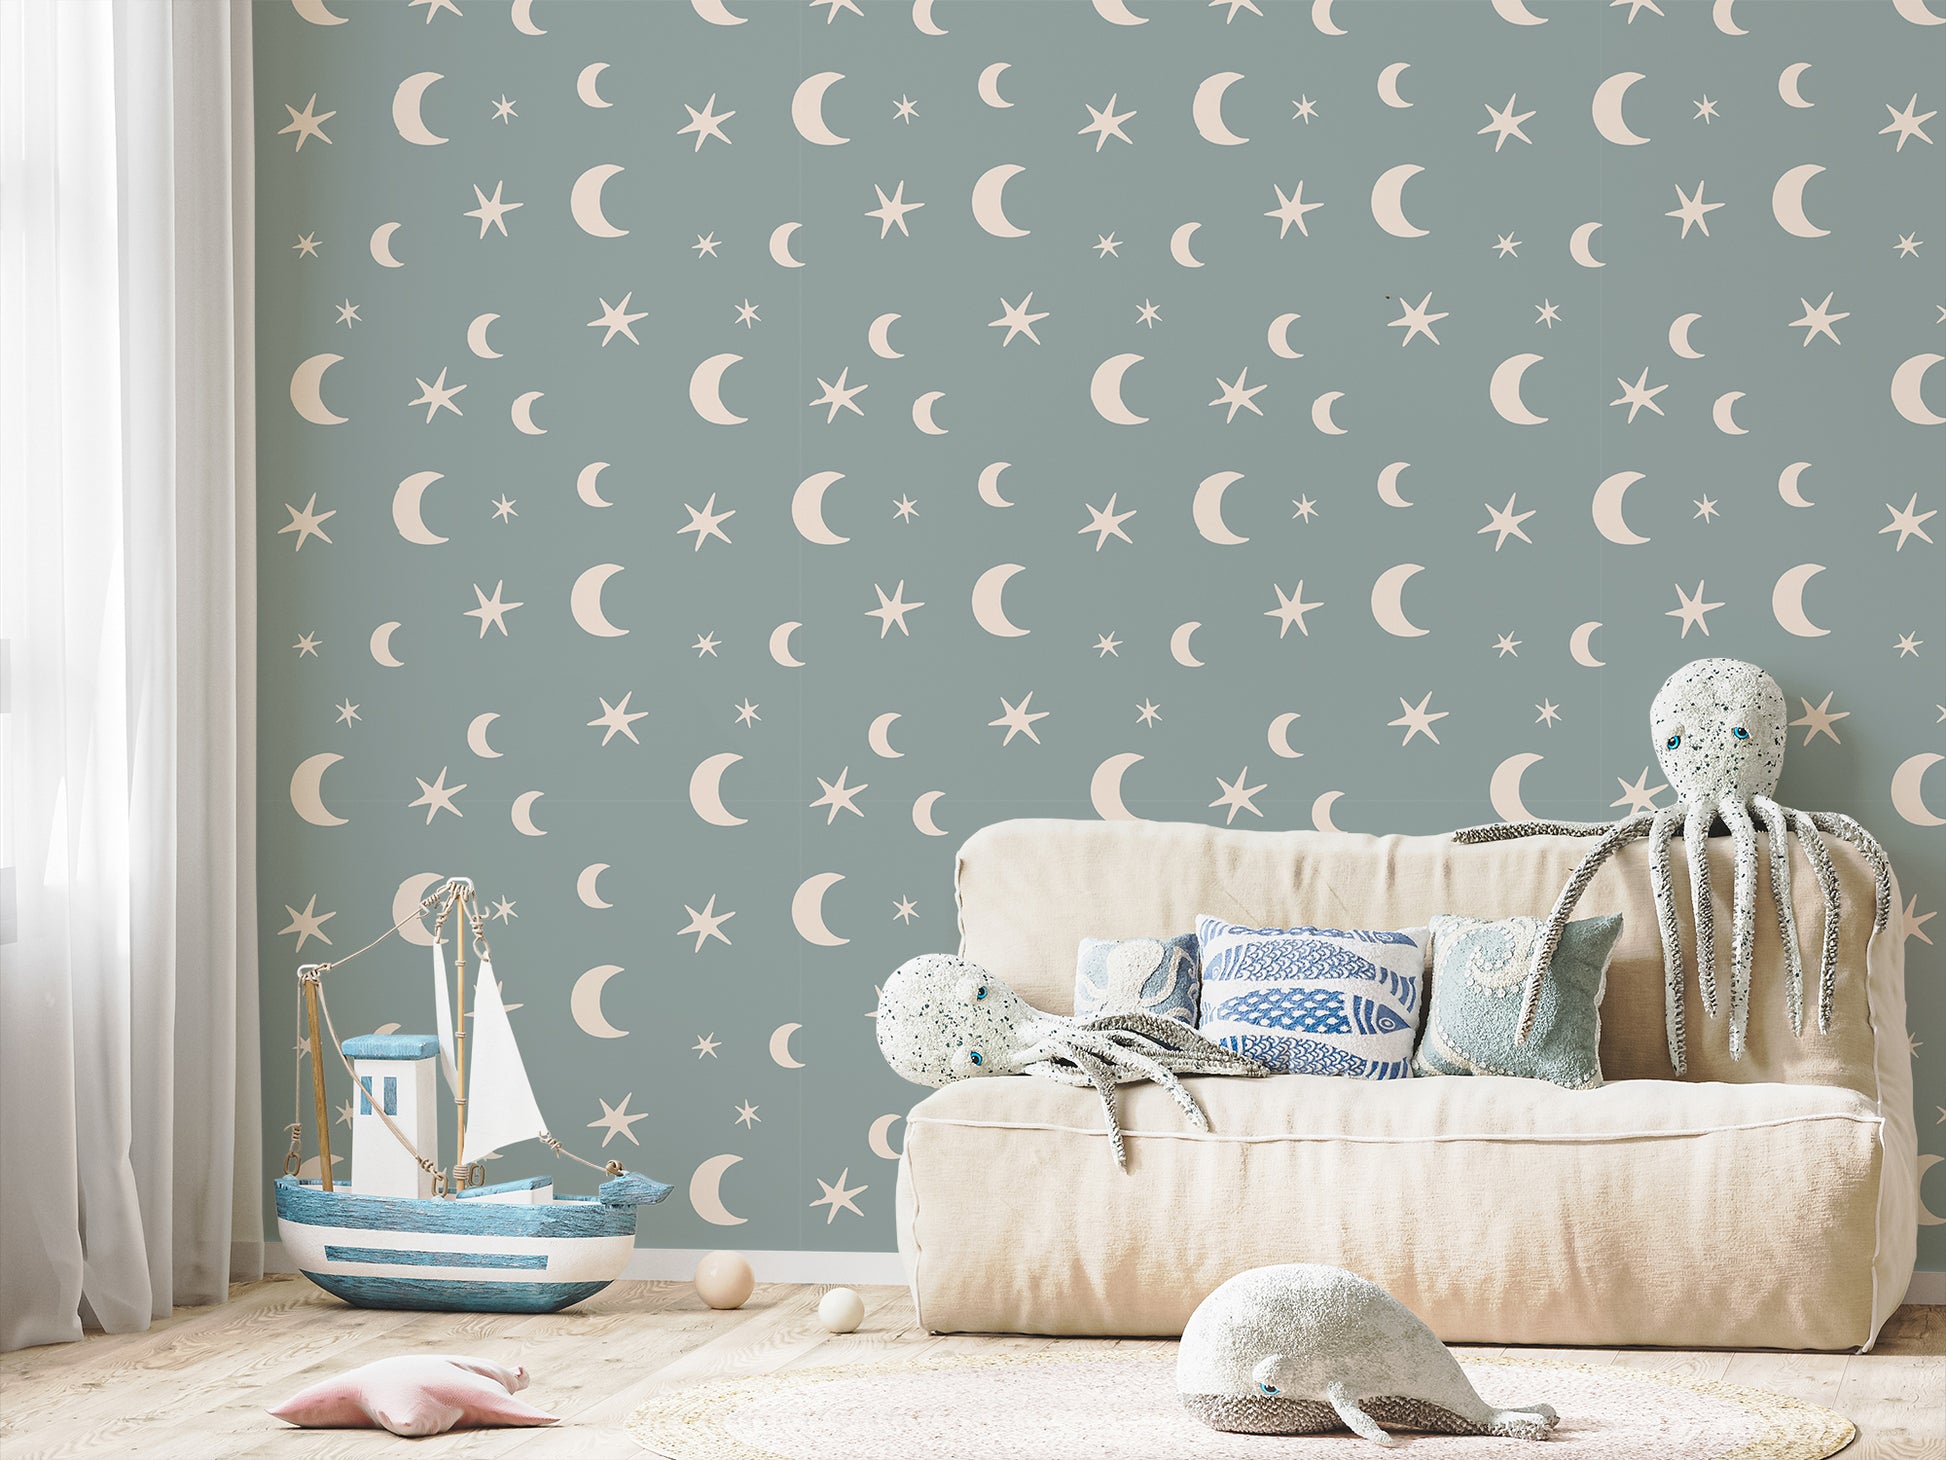 Danica Blue Boho Stars And Moon Nursery Wallpaper In Children's Playroom With Blue Boats, Octopus and Whales